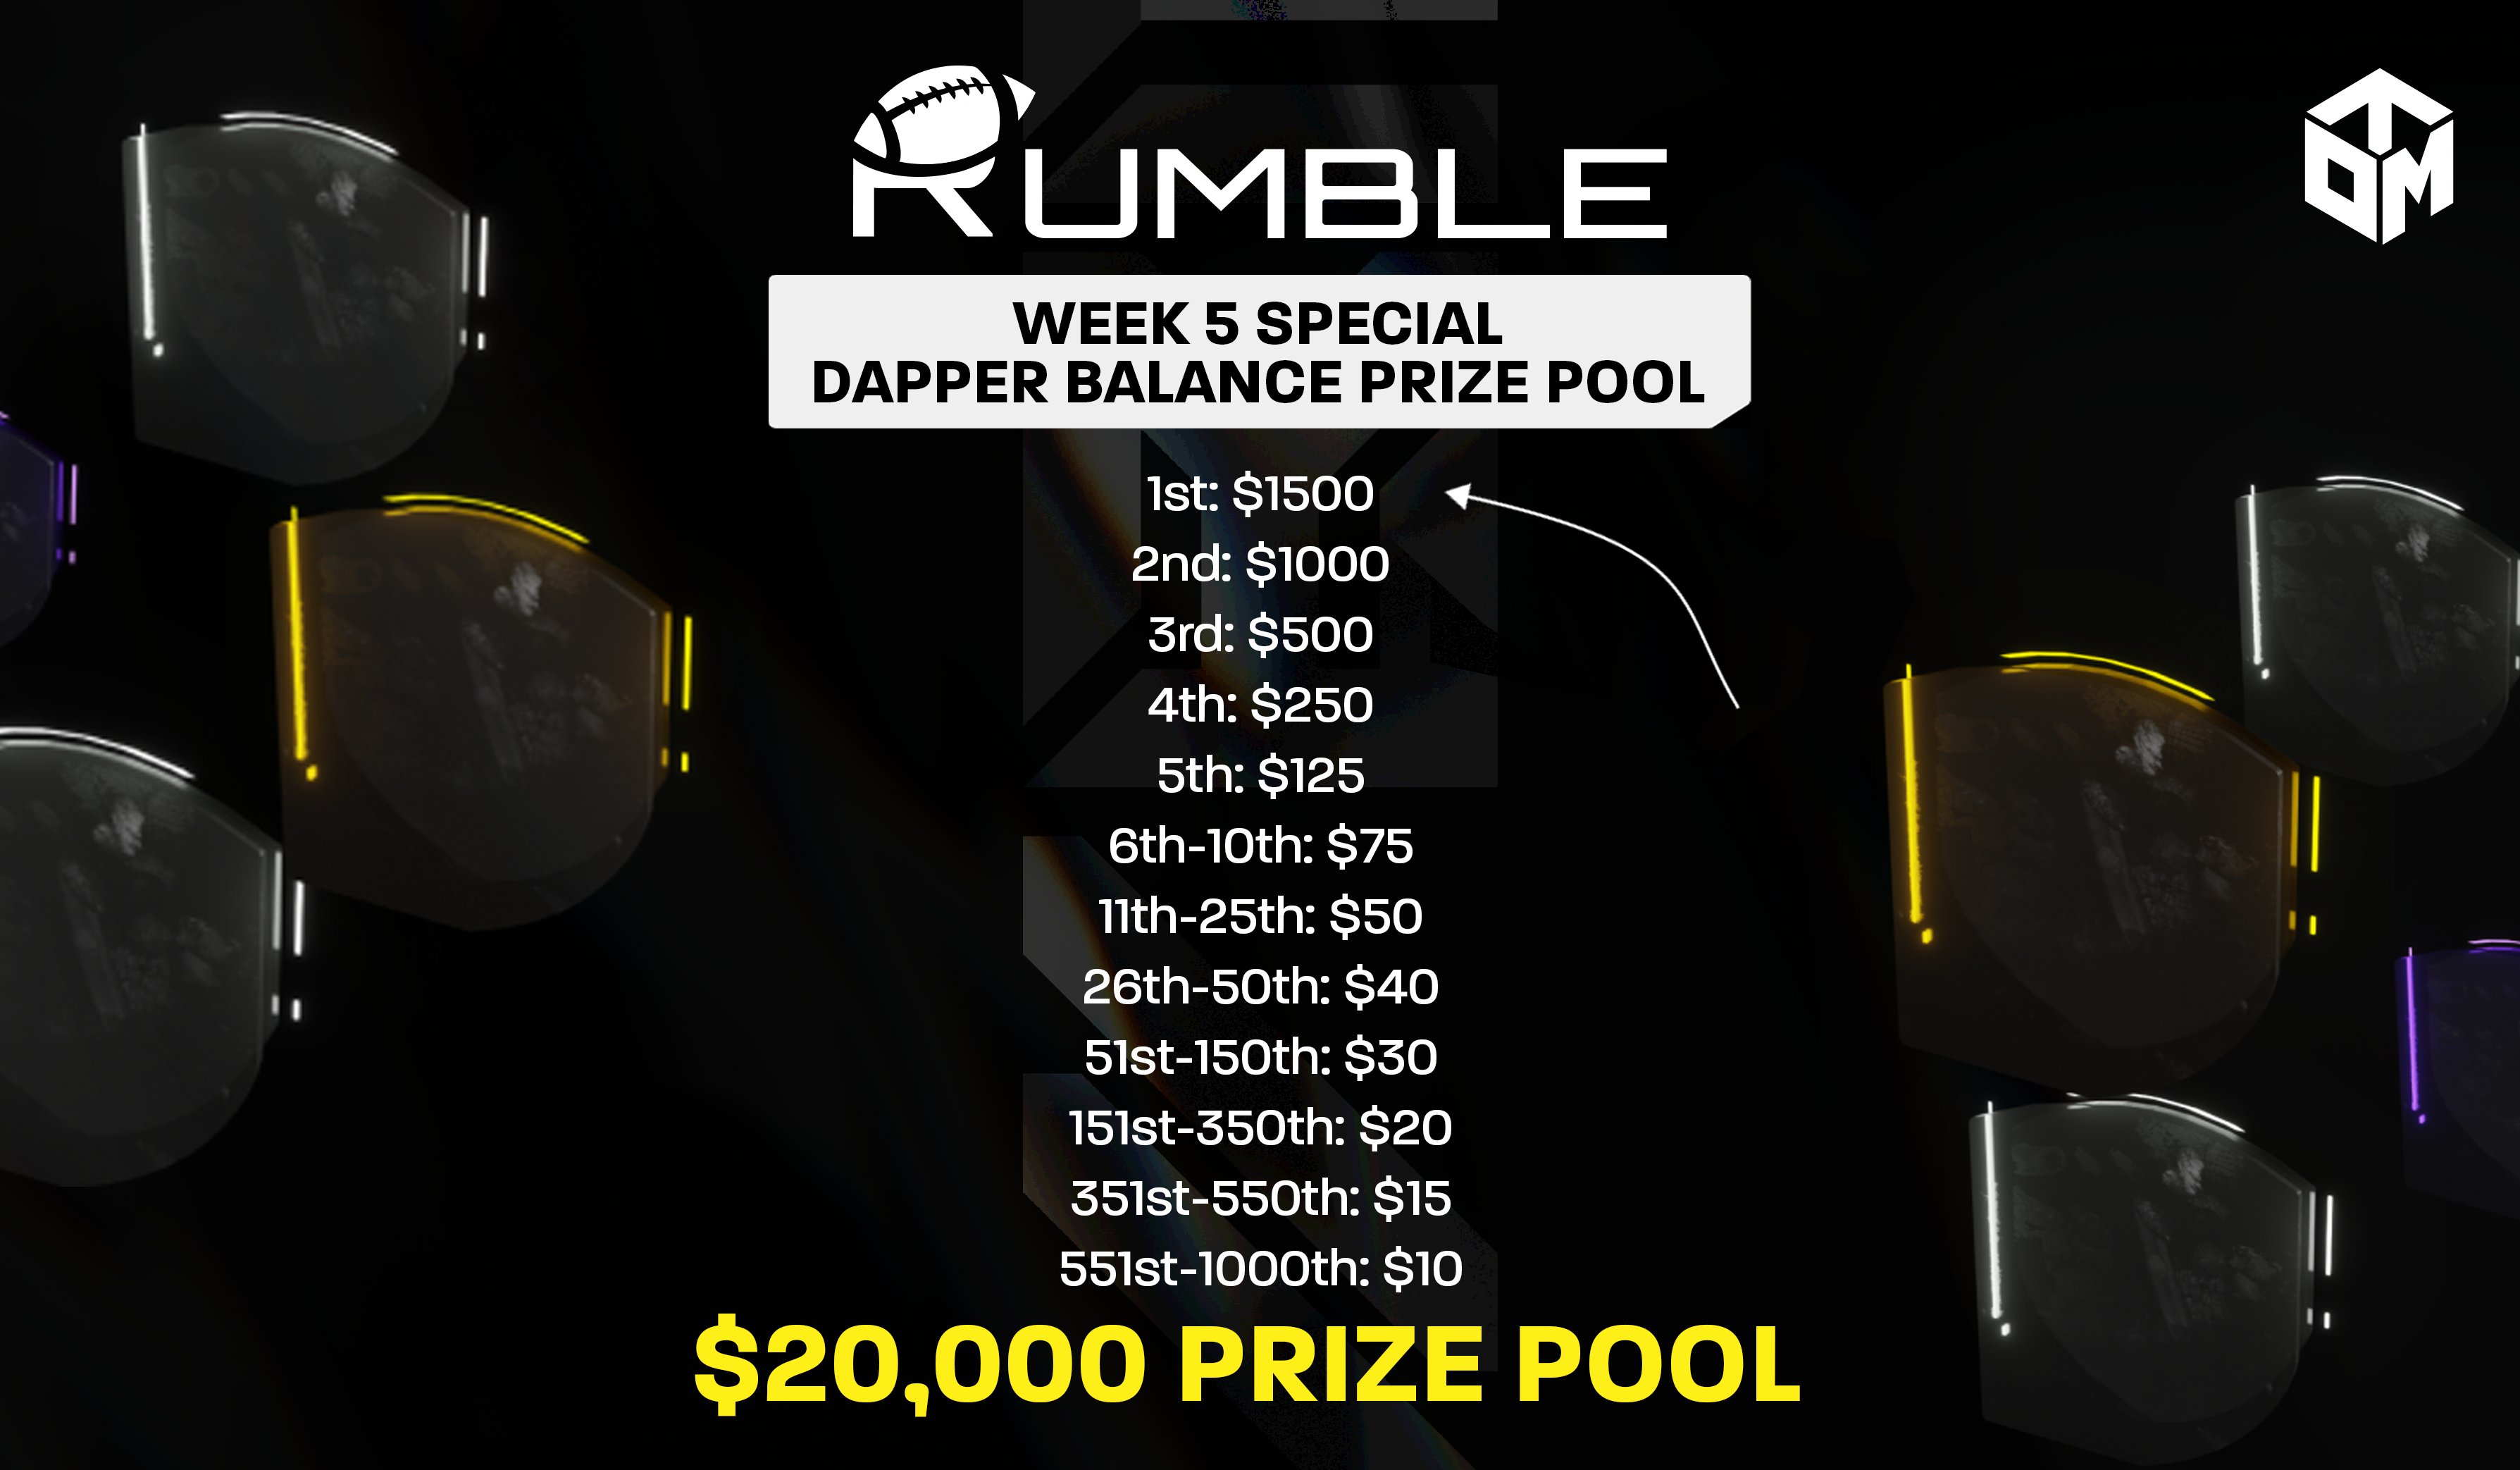 Special prize pools